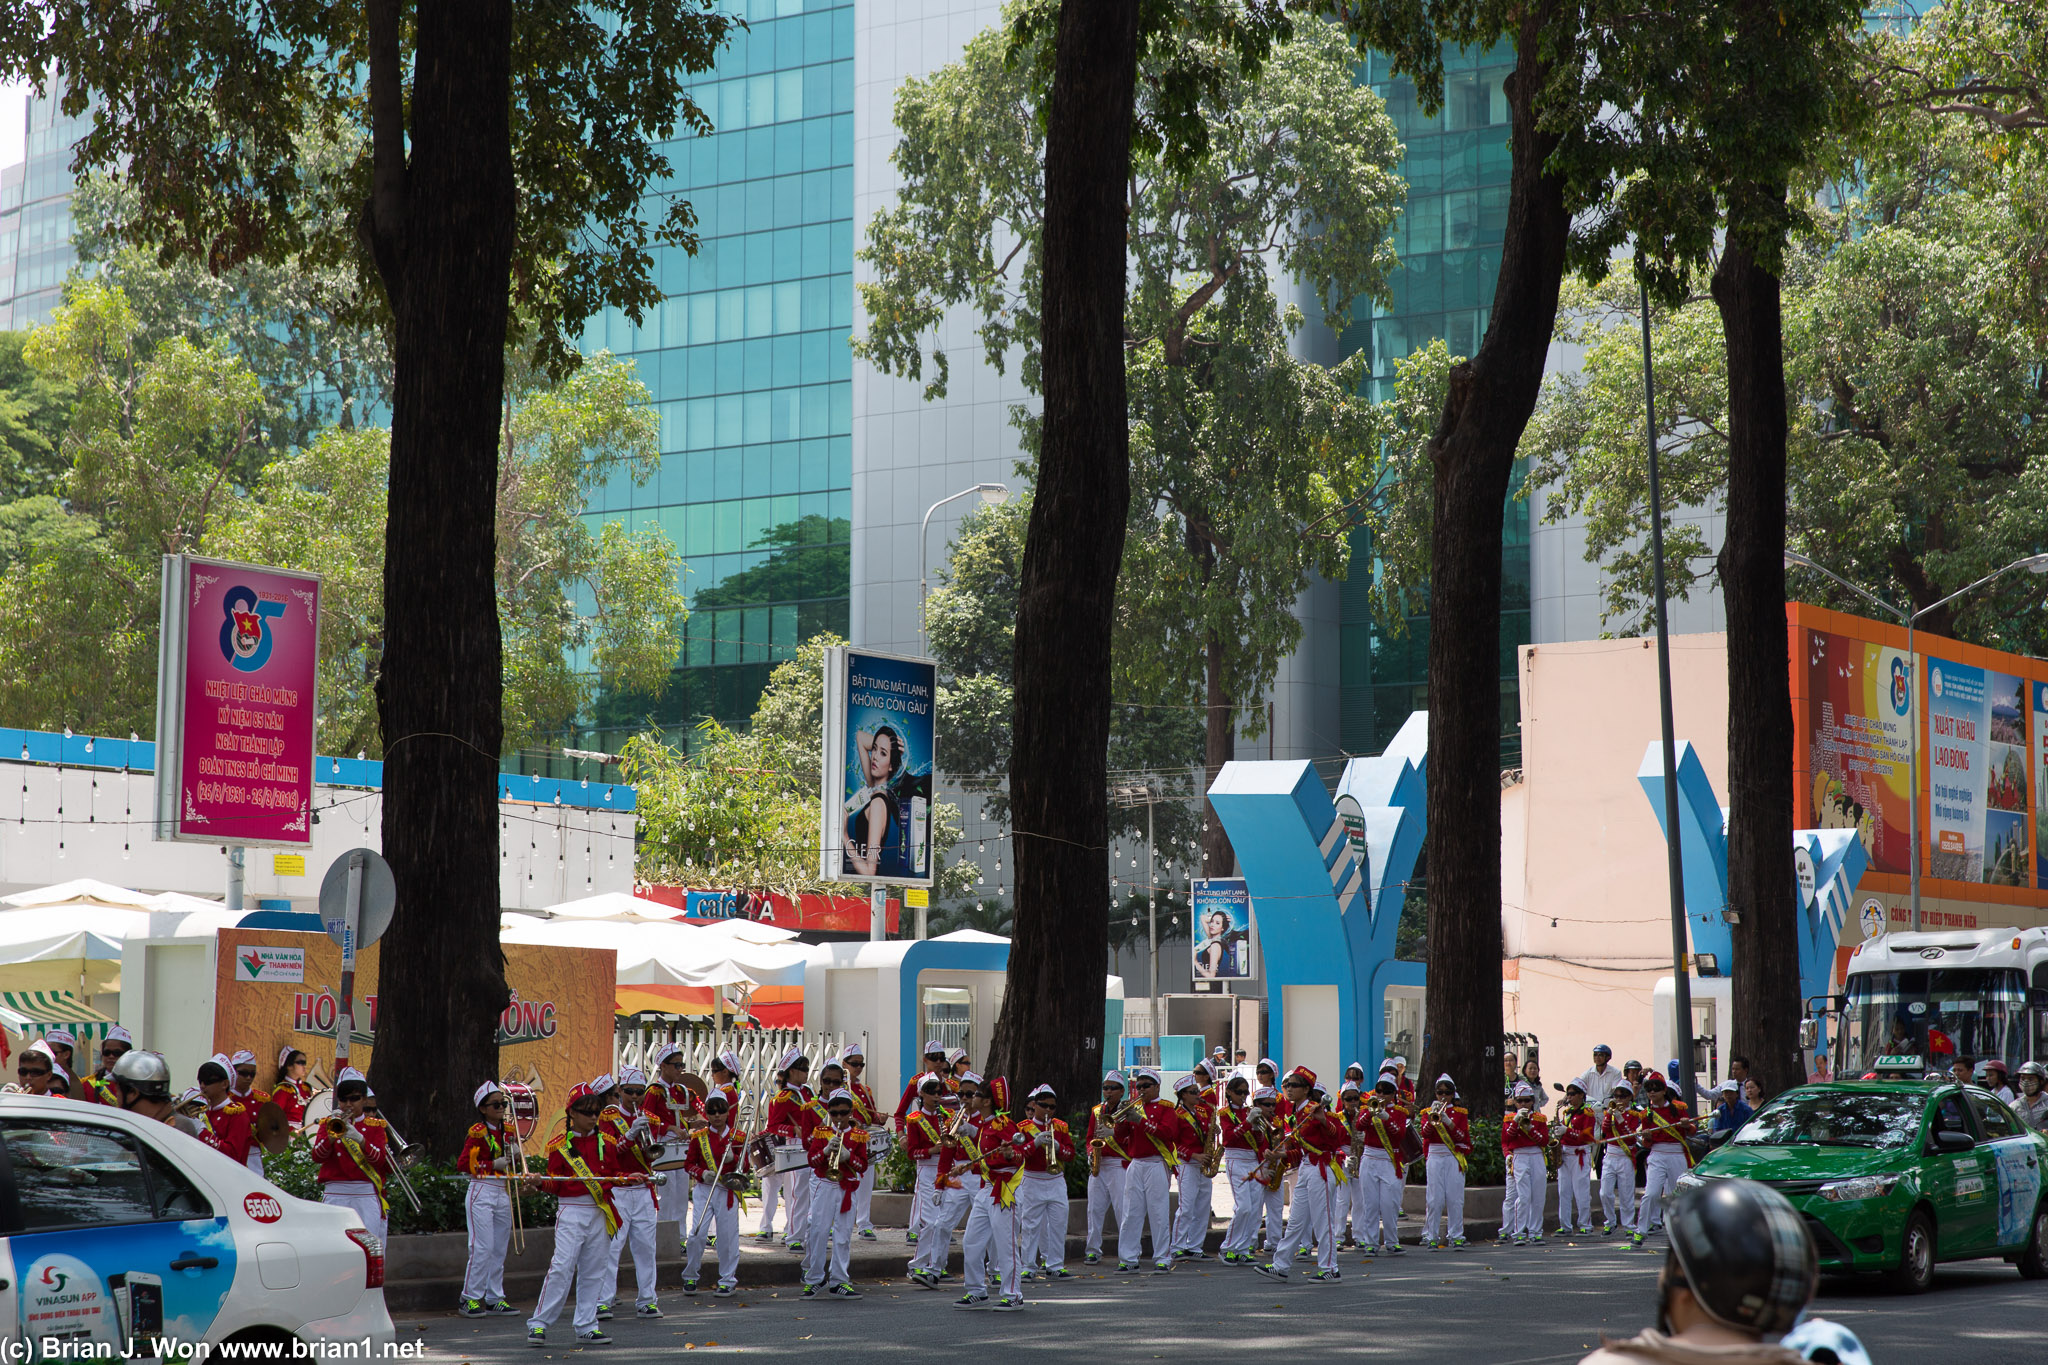 Good-sized band performing in the street (Hung Kings temple holiday this weekend!).